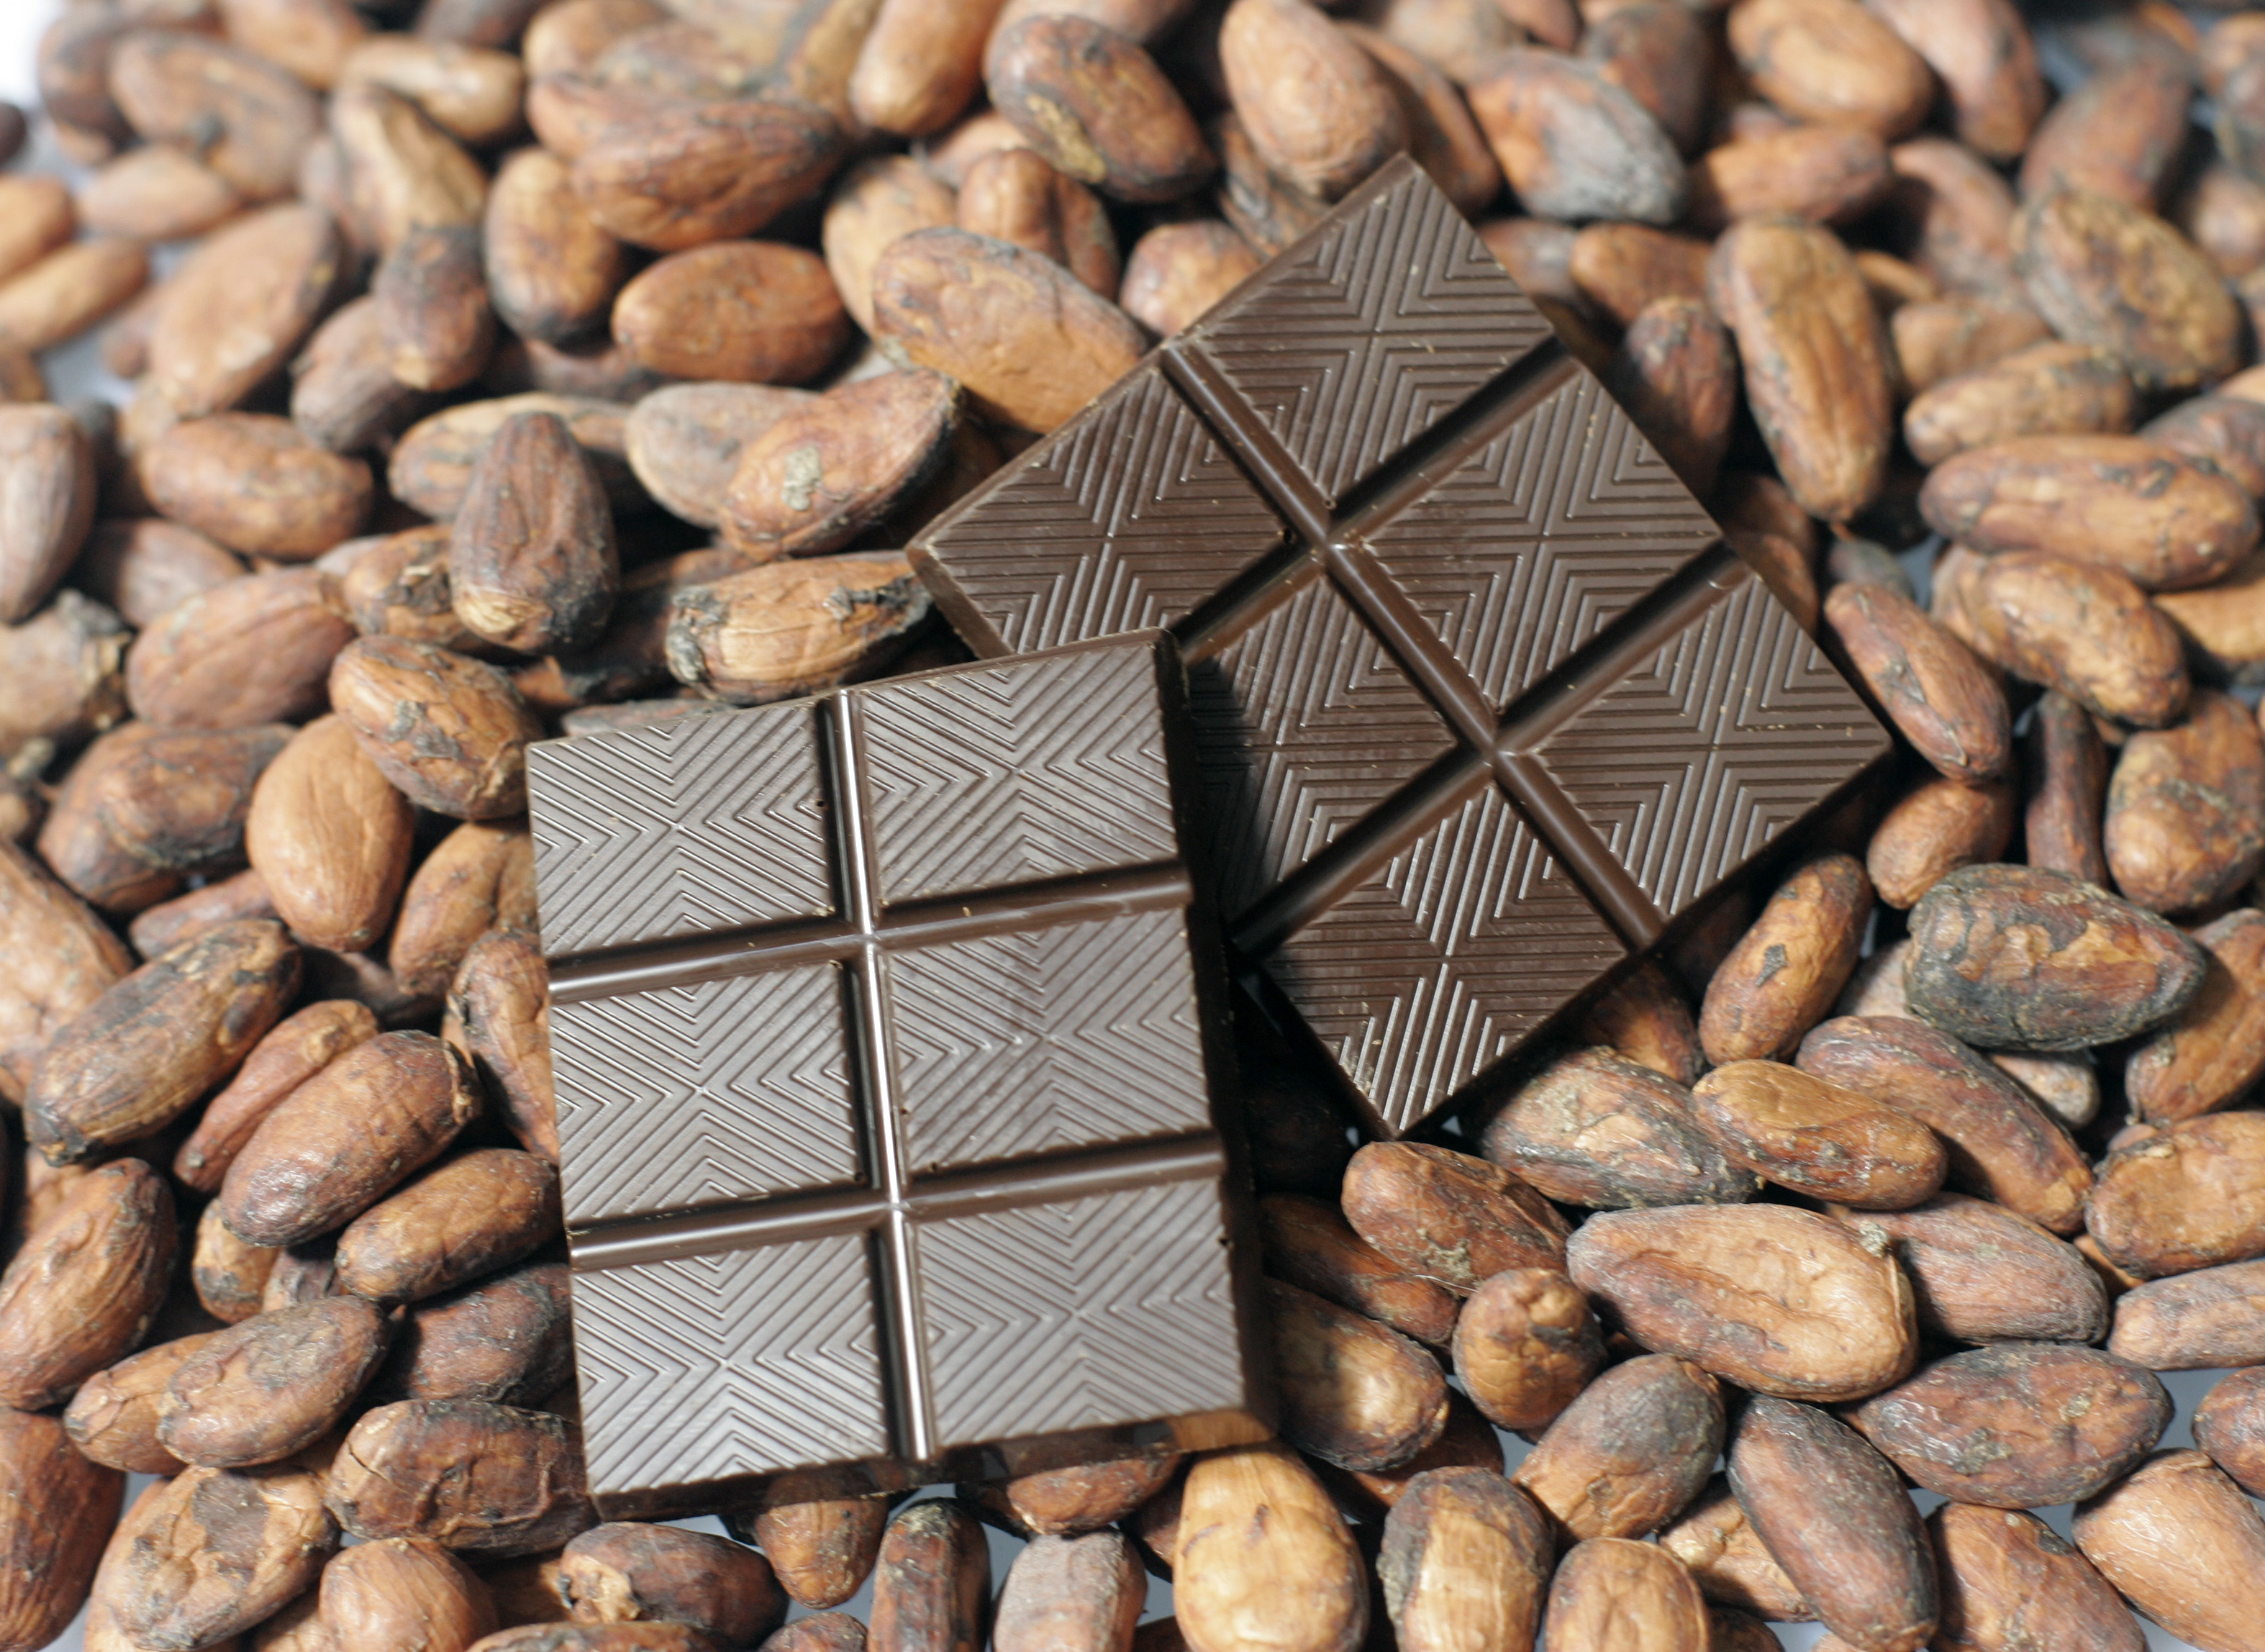 Chocolate is about to get real: Classifying cacao ‘diamonds’ from duds